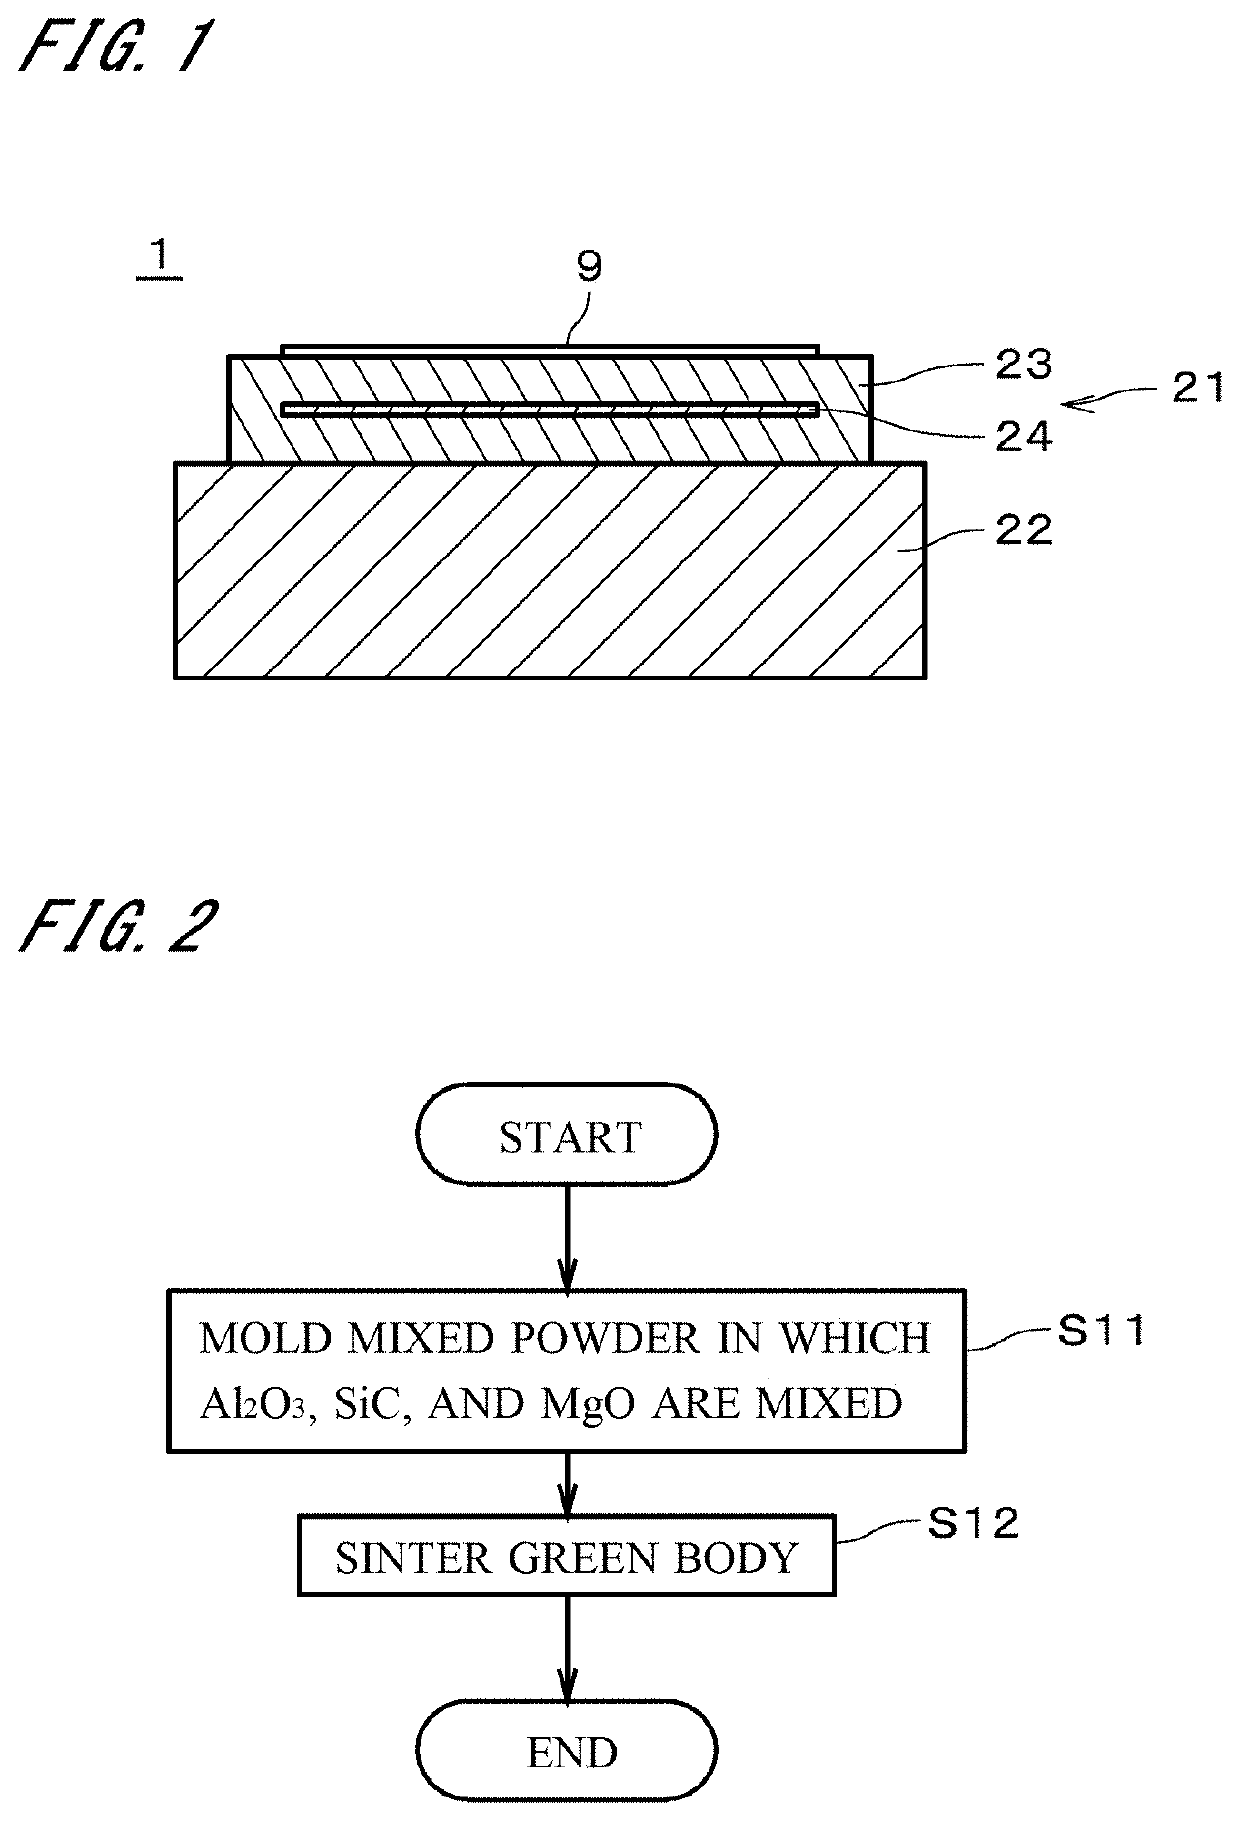 Composite sintered body, semiconductor manufacturing apparatus member, and method of manufacturing composite sintered body